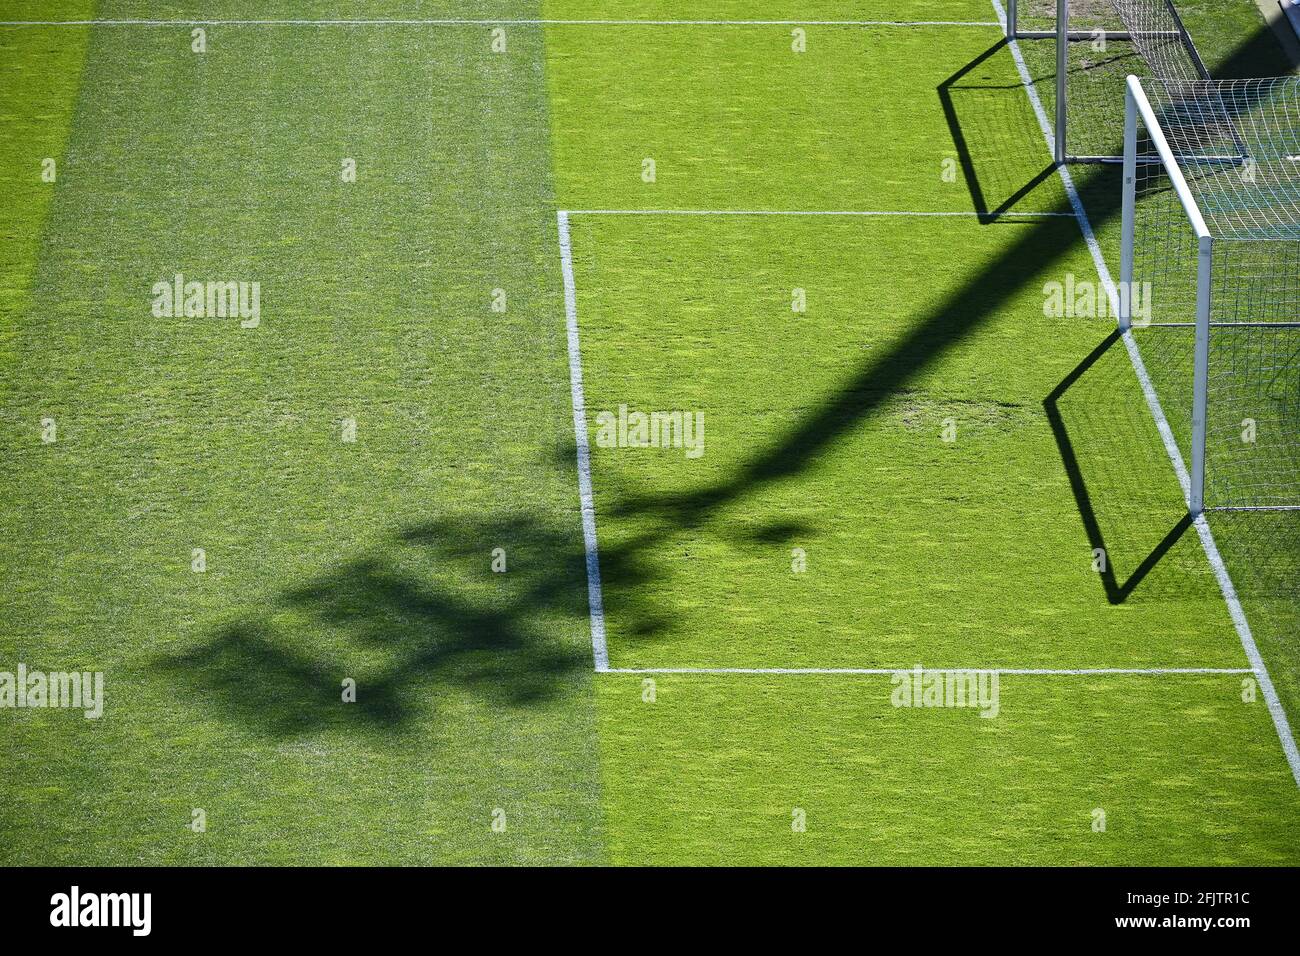 Karlsruhe, Deutschland. 26th Apr, 2021. Shadow of a provisional floodlight pole in the penalty area of the Wildpark Stadium. GES/Football/2. Bundesliga: Karlsruher SC - Erzgebirge Aue, April 26th, 2021 Football/Soccer: 2nd League: Karlsruher SC vs Erzgebirge Aue, Karlsruhe, April 26, 2021 | usage worldwide Credit: dpa/Alamy Live News Stock Photo